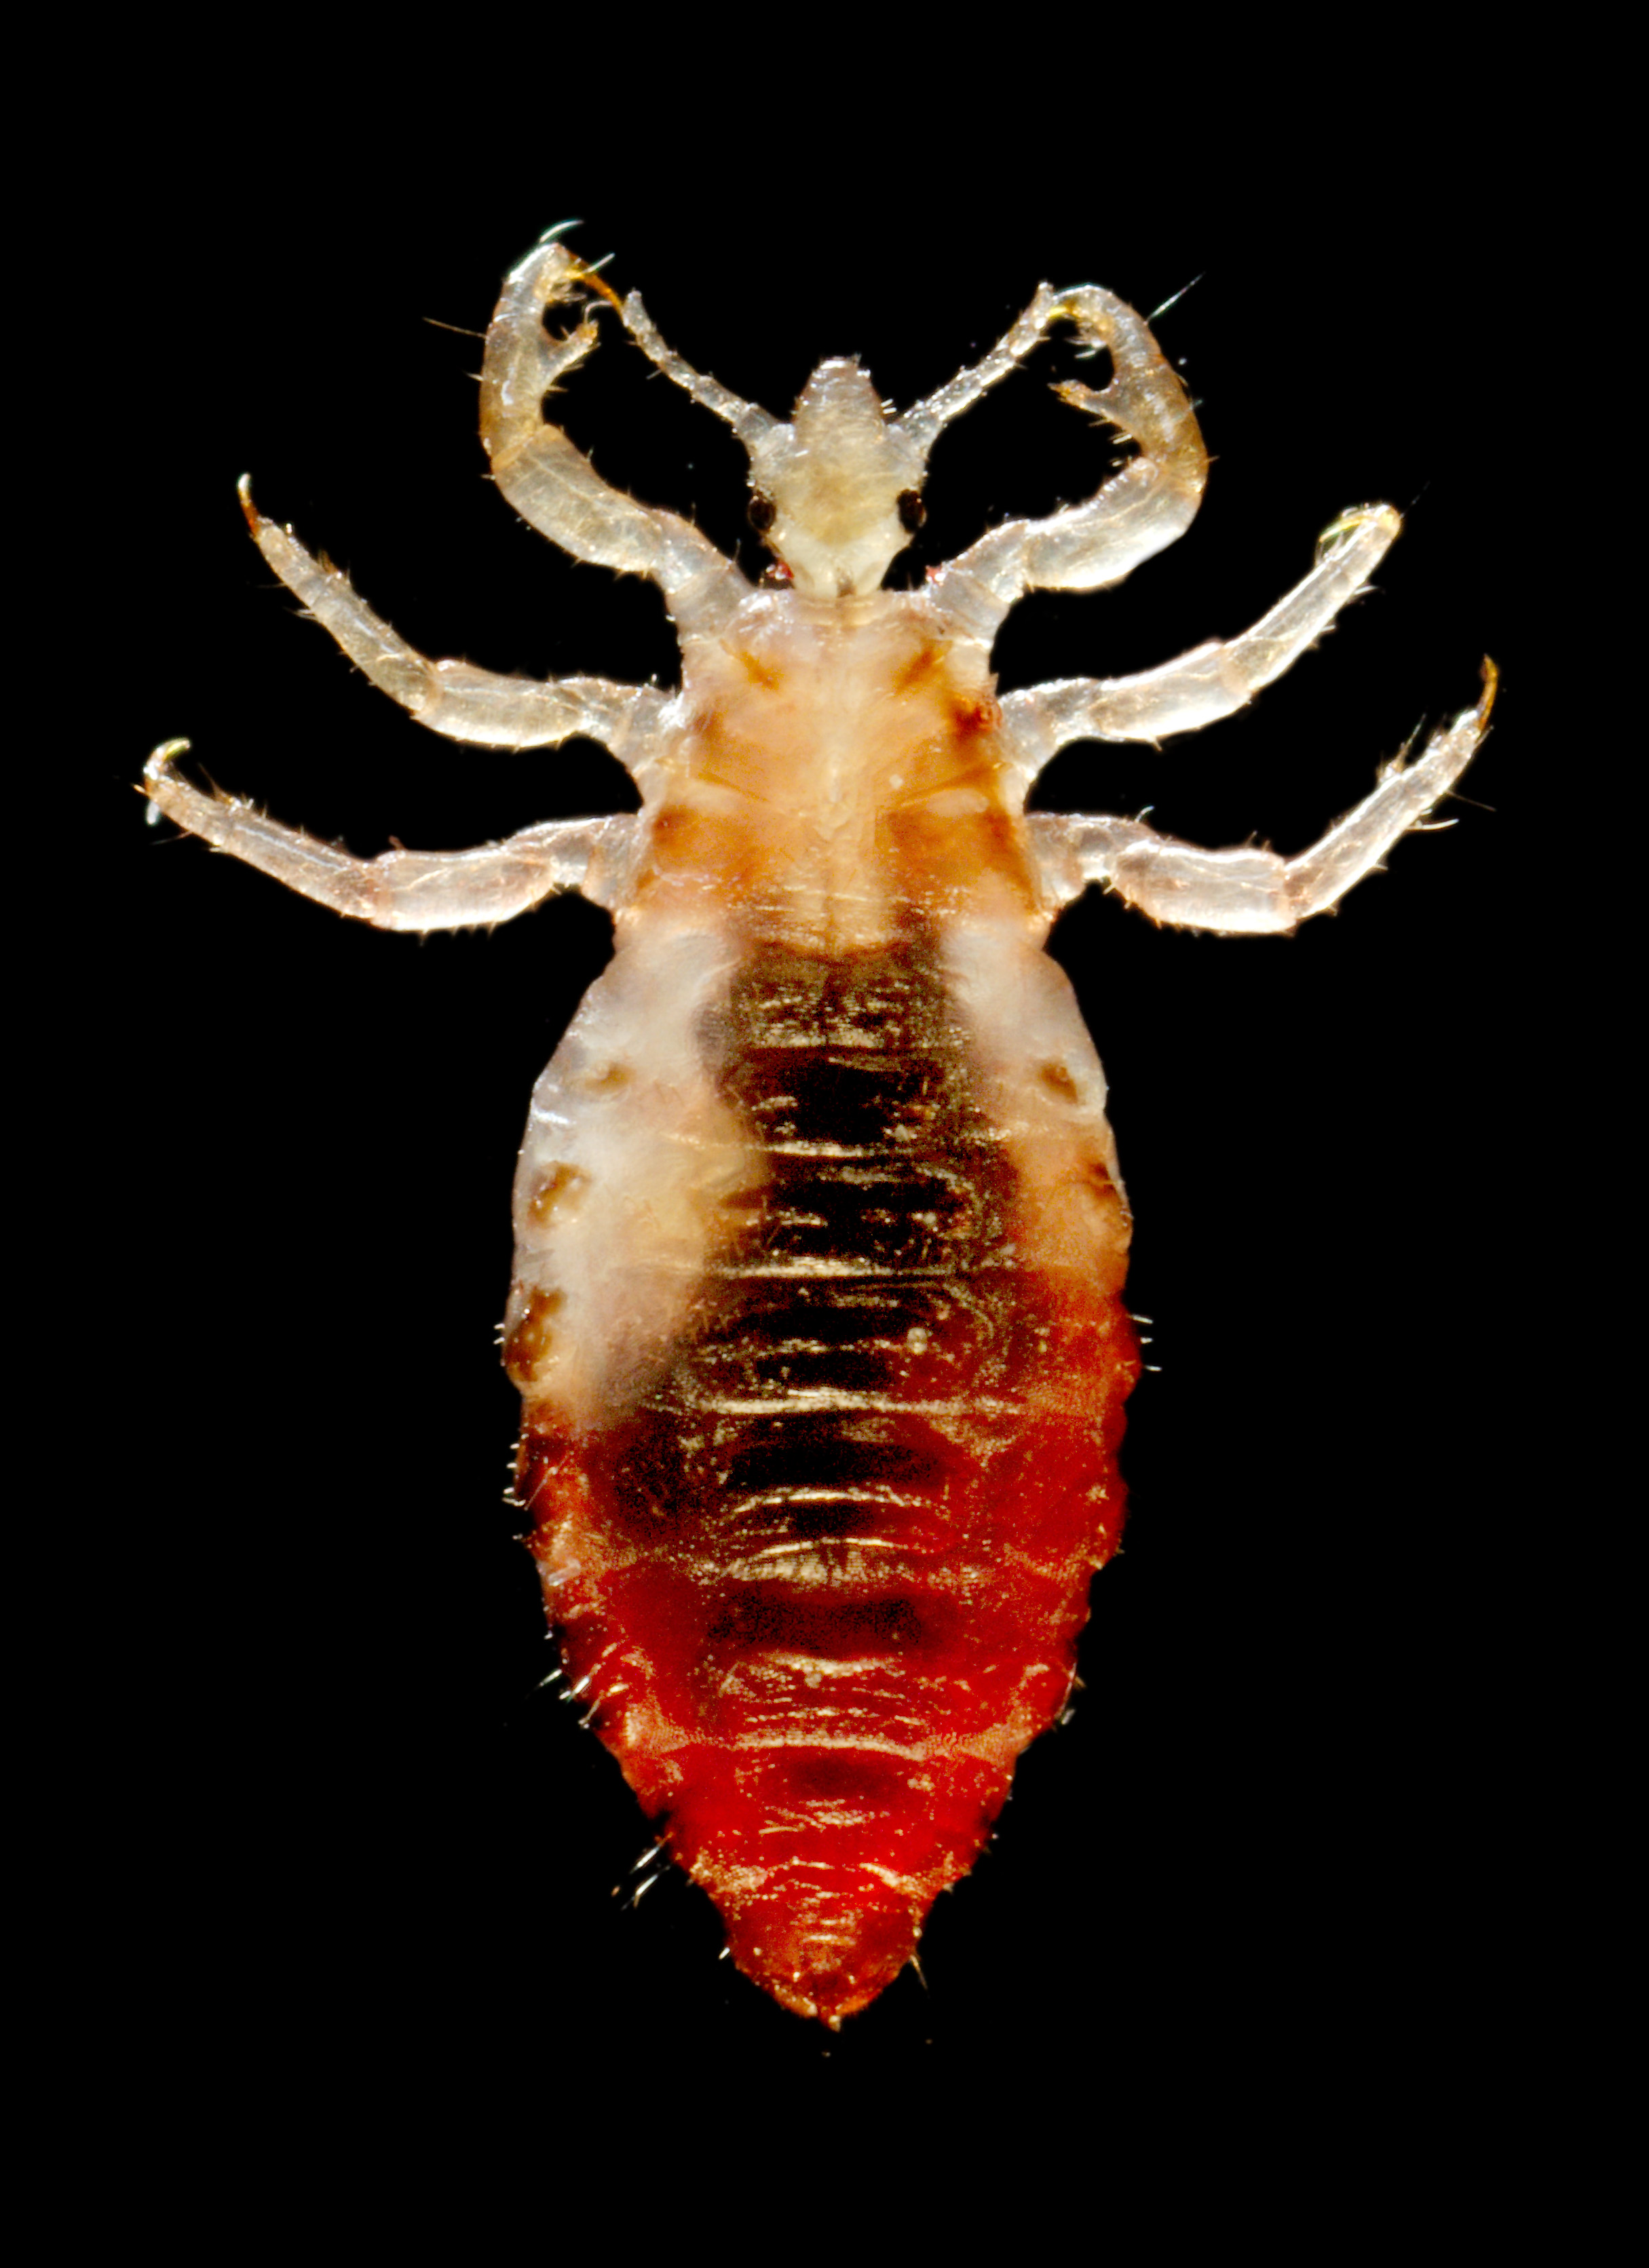 Close up of a louse, positioned as if for scientific examination on a slide